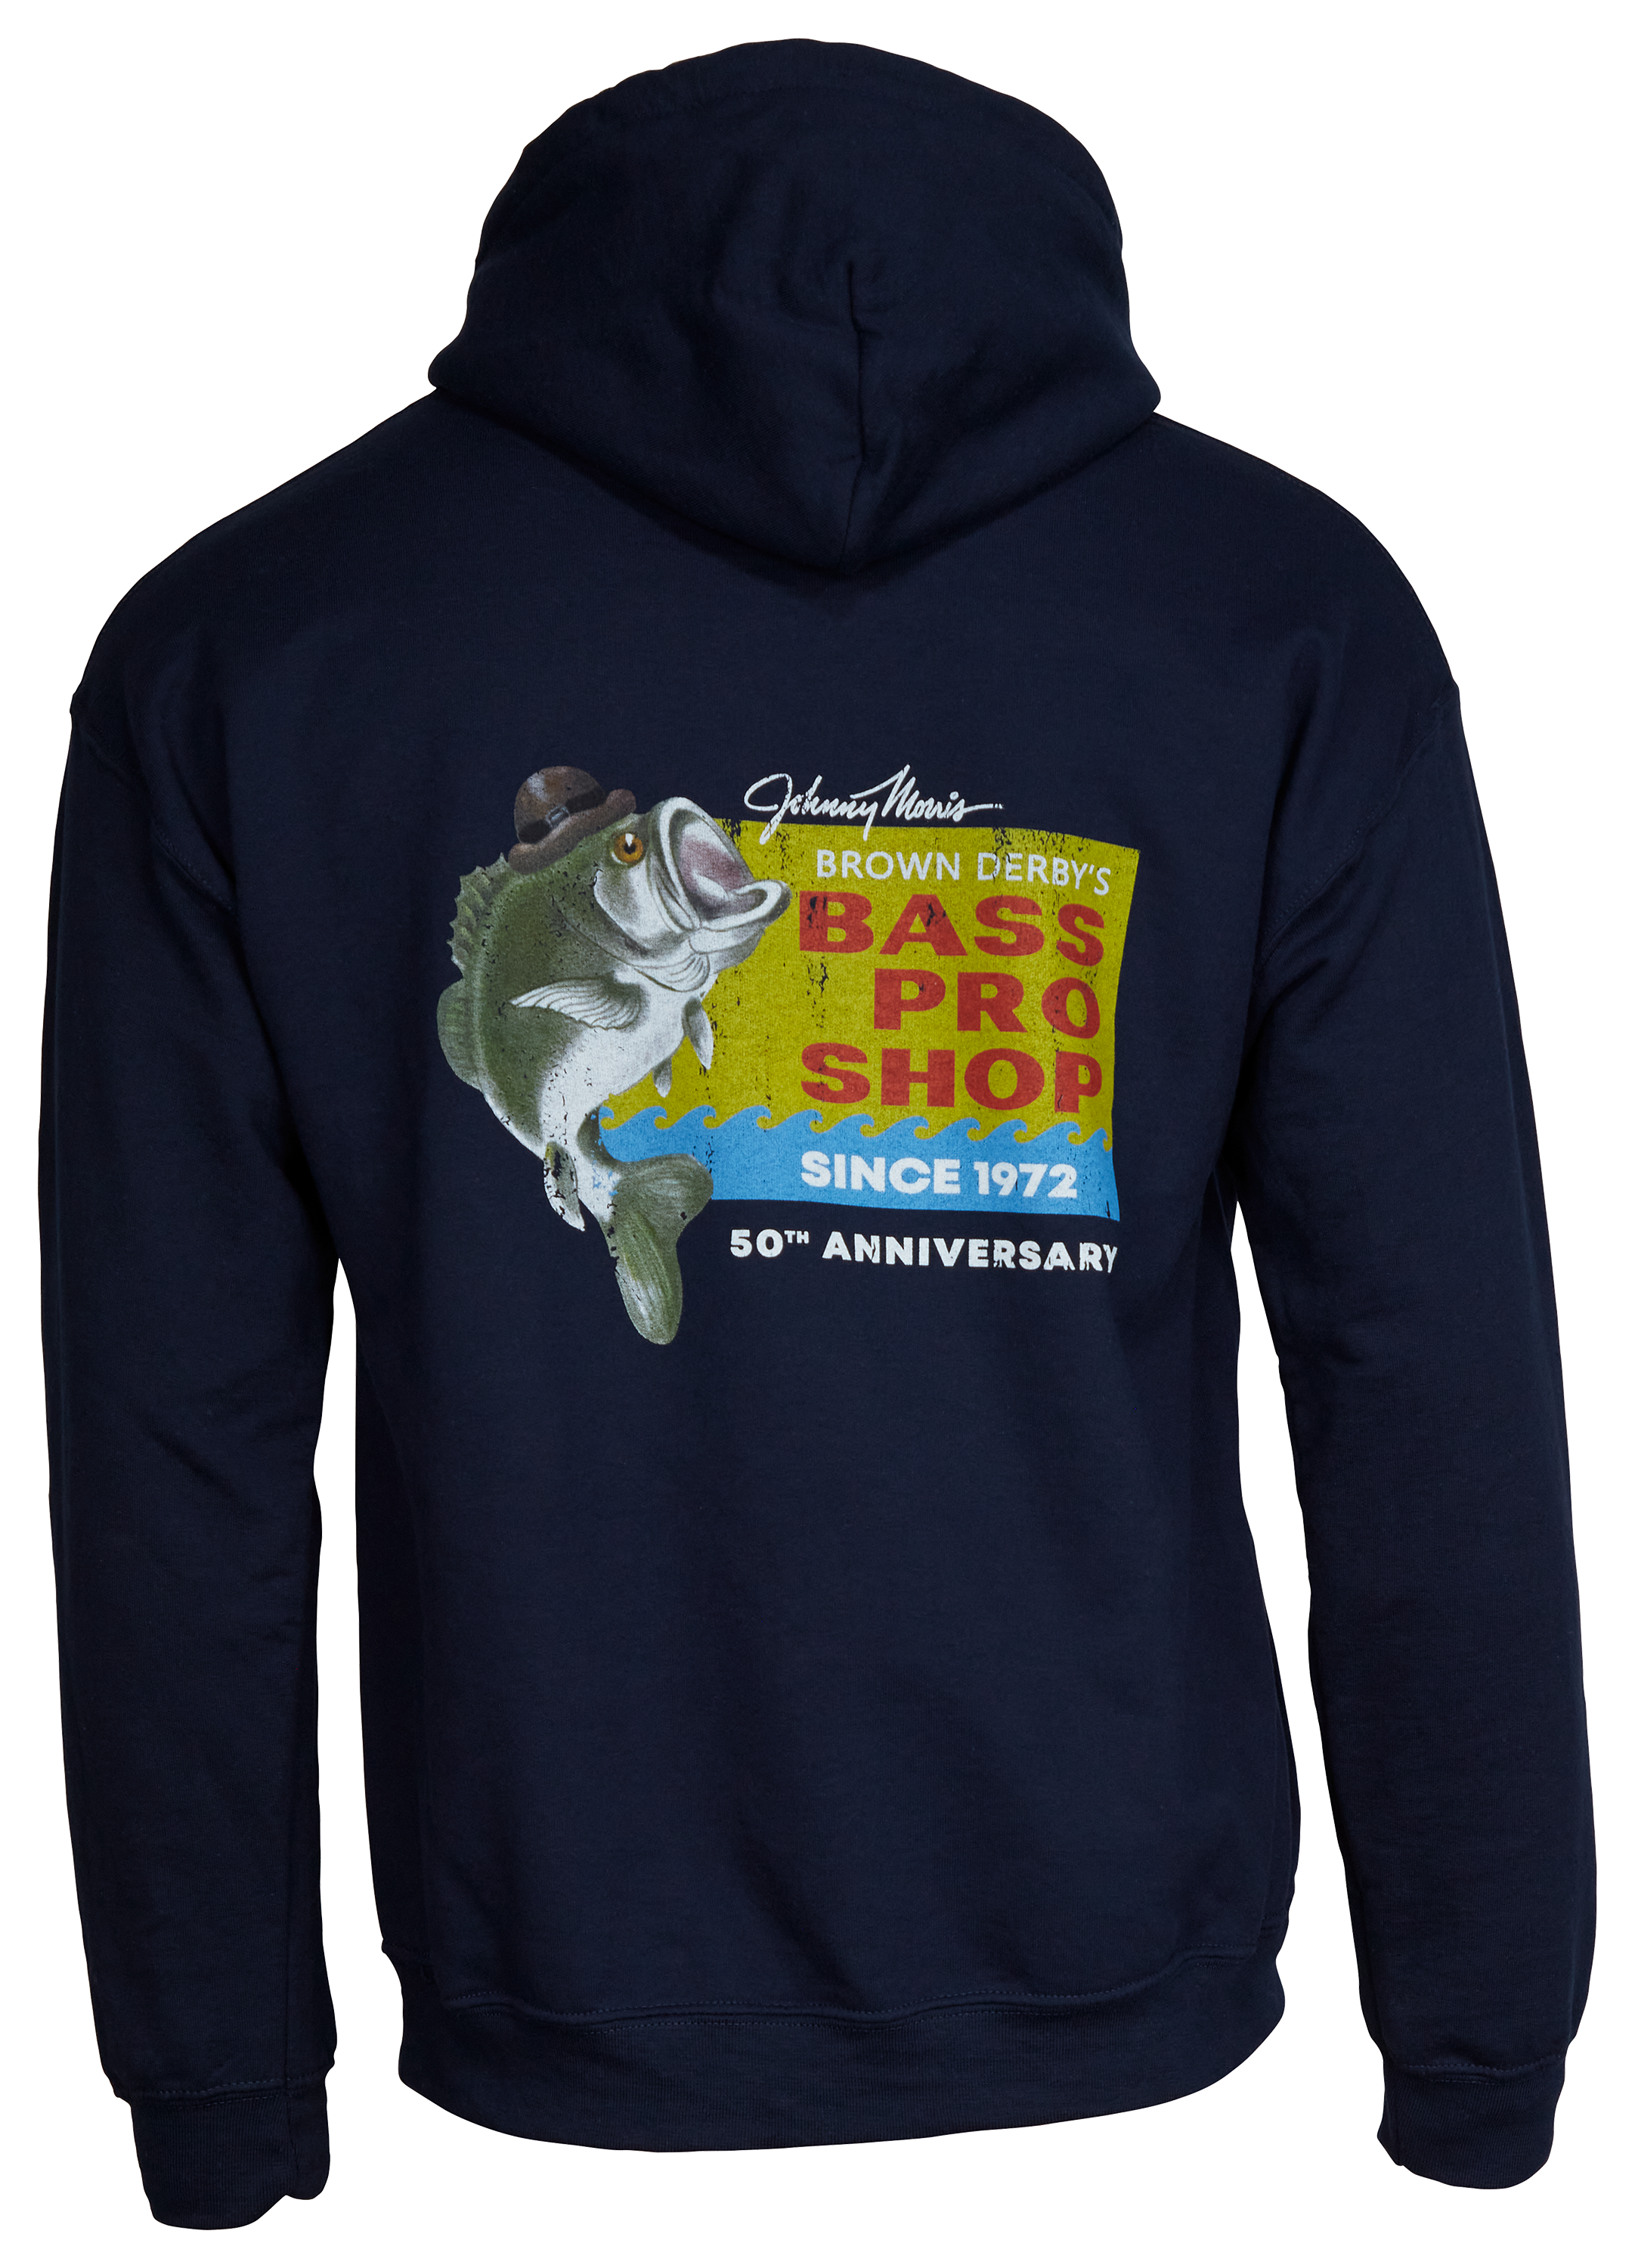 Bass Pro Shops Brown Derby Back Graphic Long-Sleeve Hoodie for Men